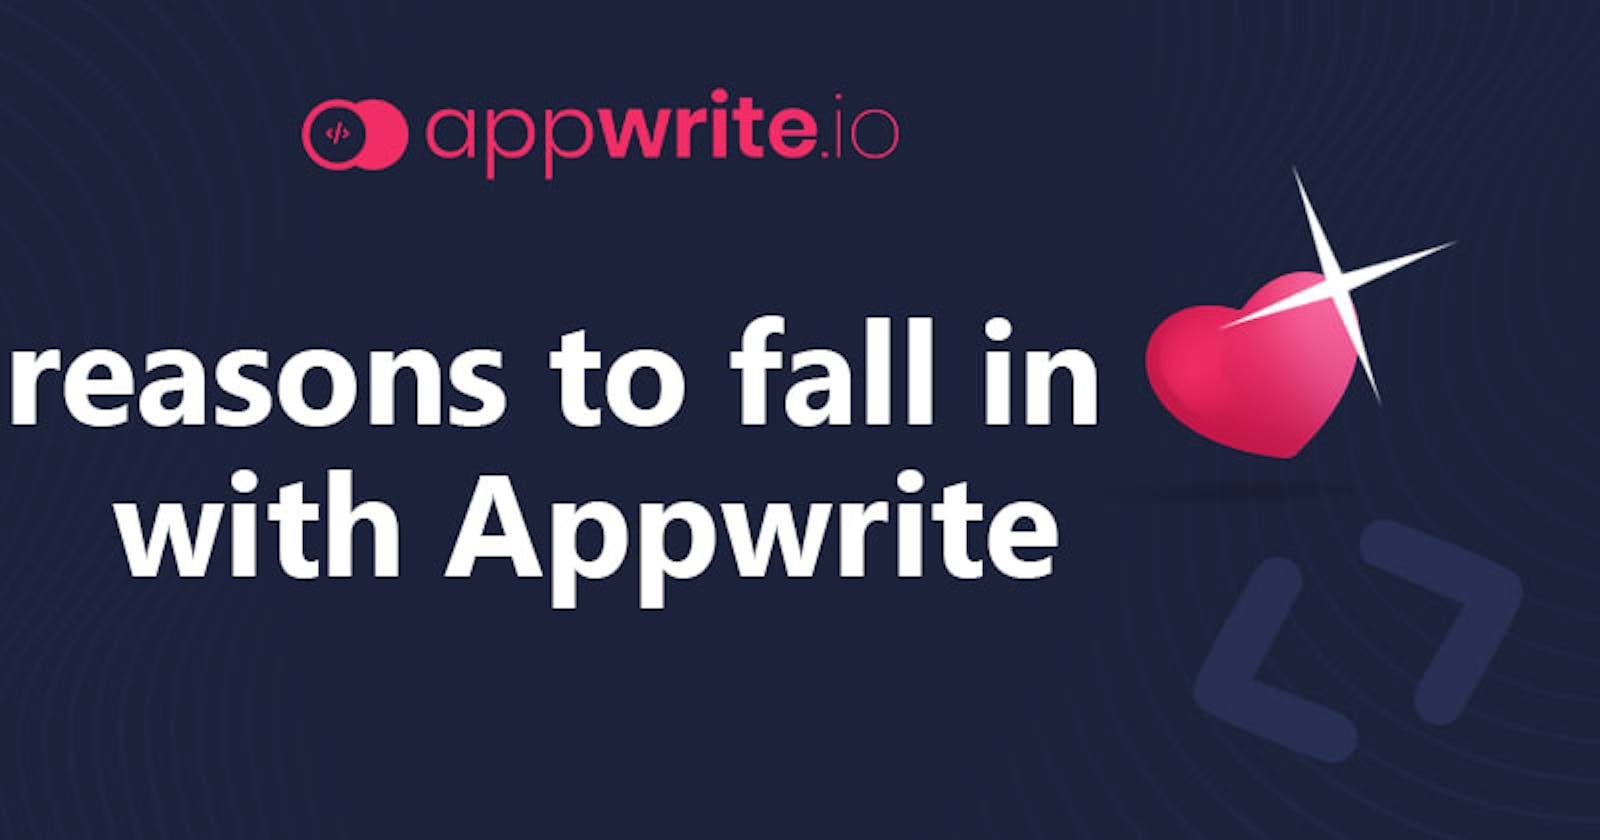 8 reasons to fall in ❤️ with Appwrite